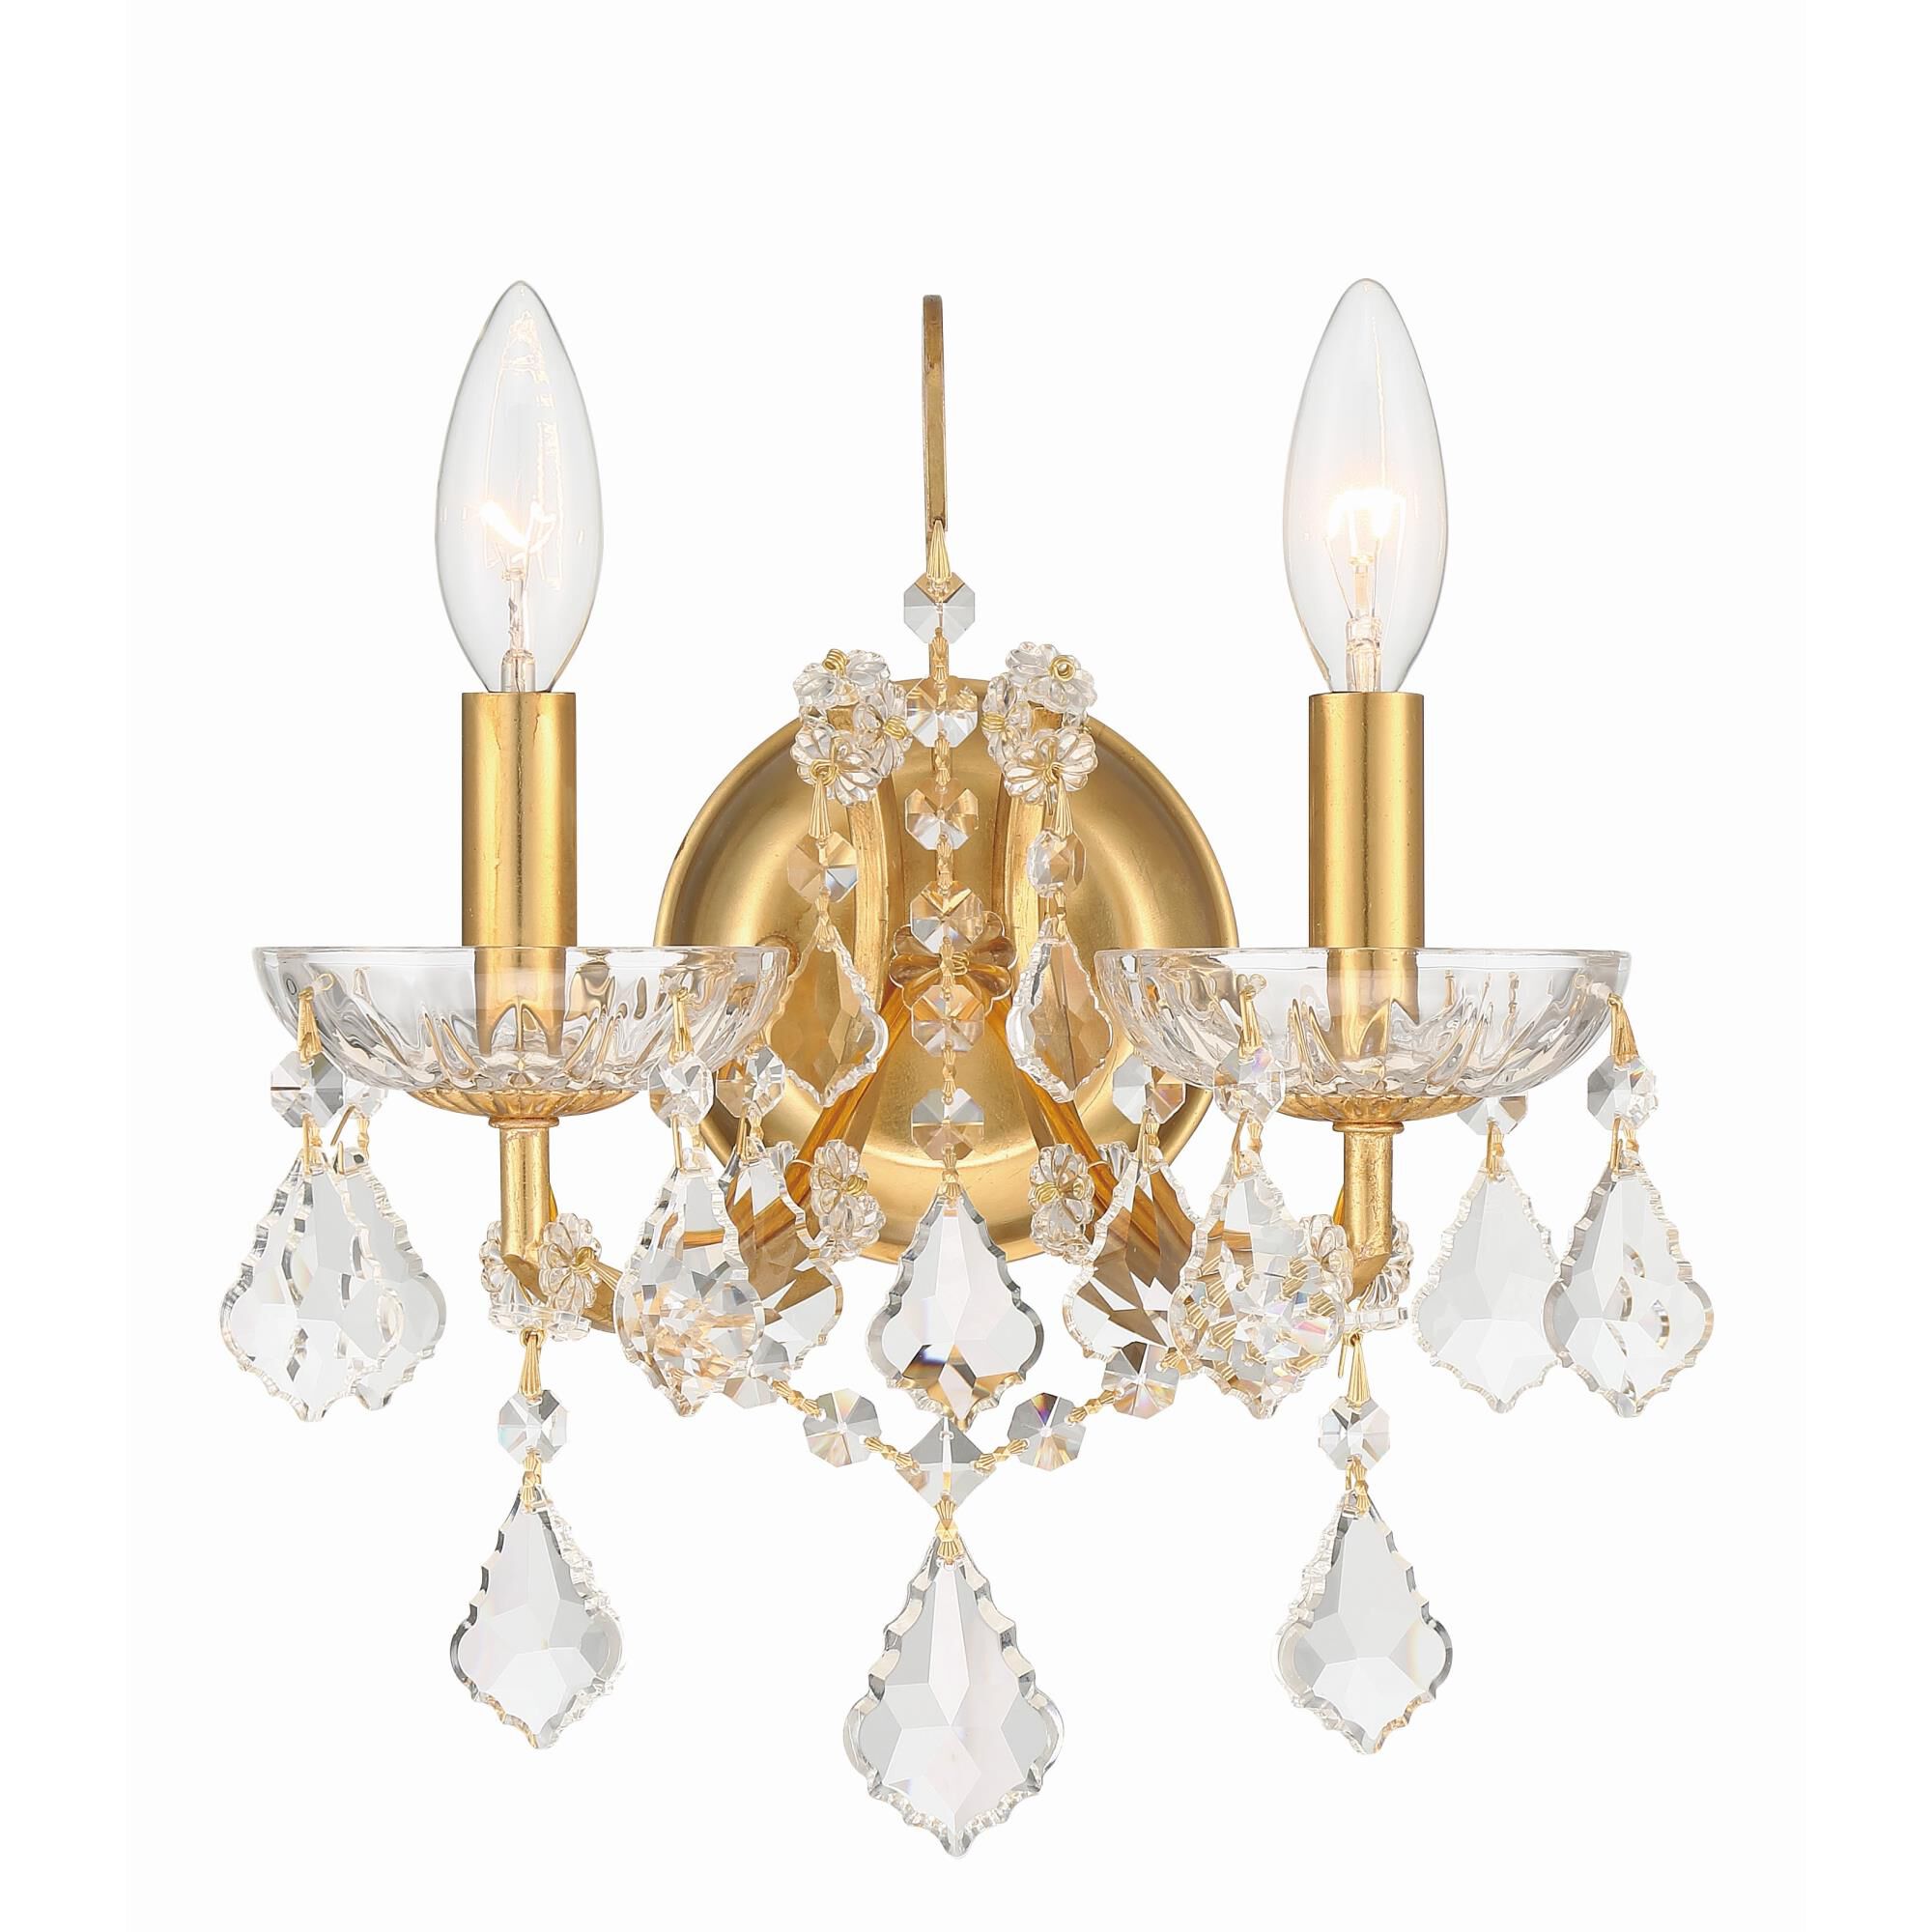 Photos - Chandelier / Lamp Crystorama Filmore 12 Inch Wall Sconce Filmore - 4452-GA-CL-MWP - Crystal